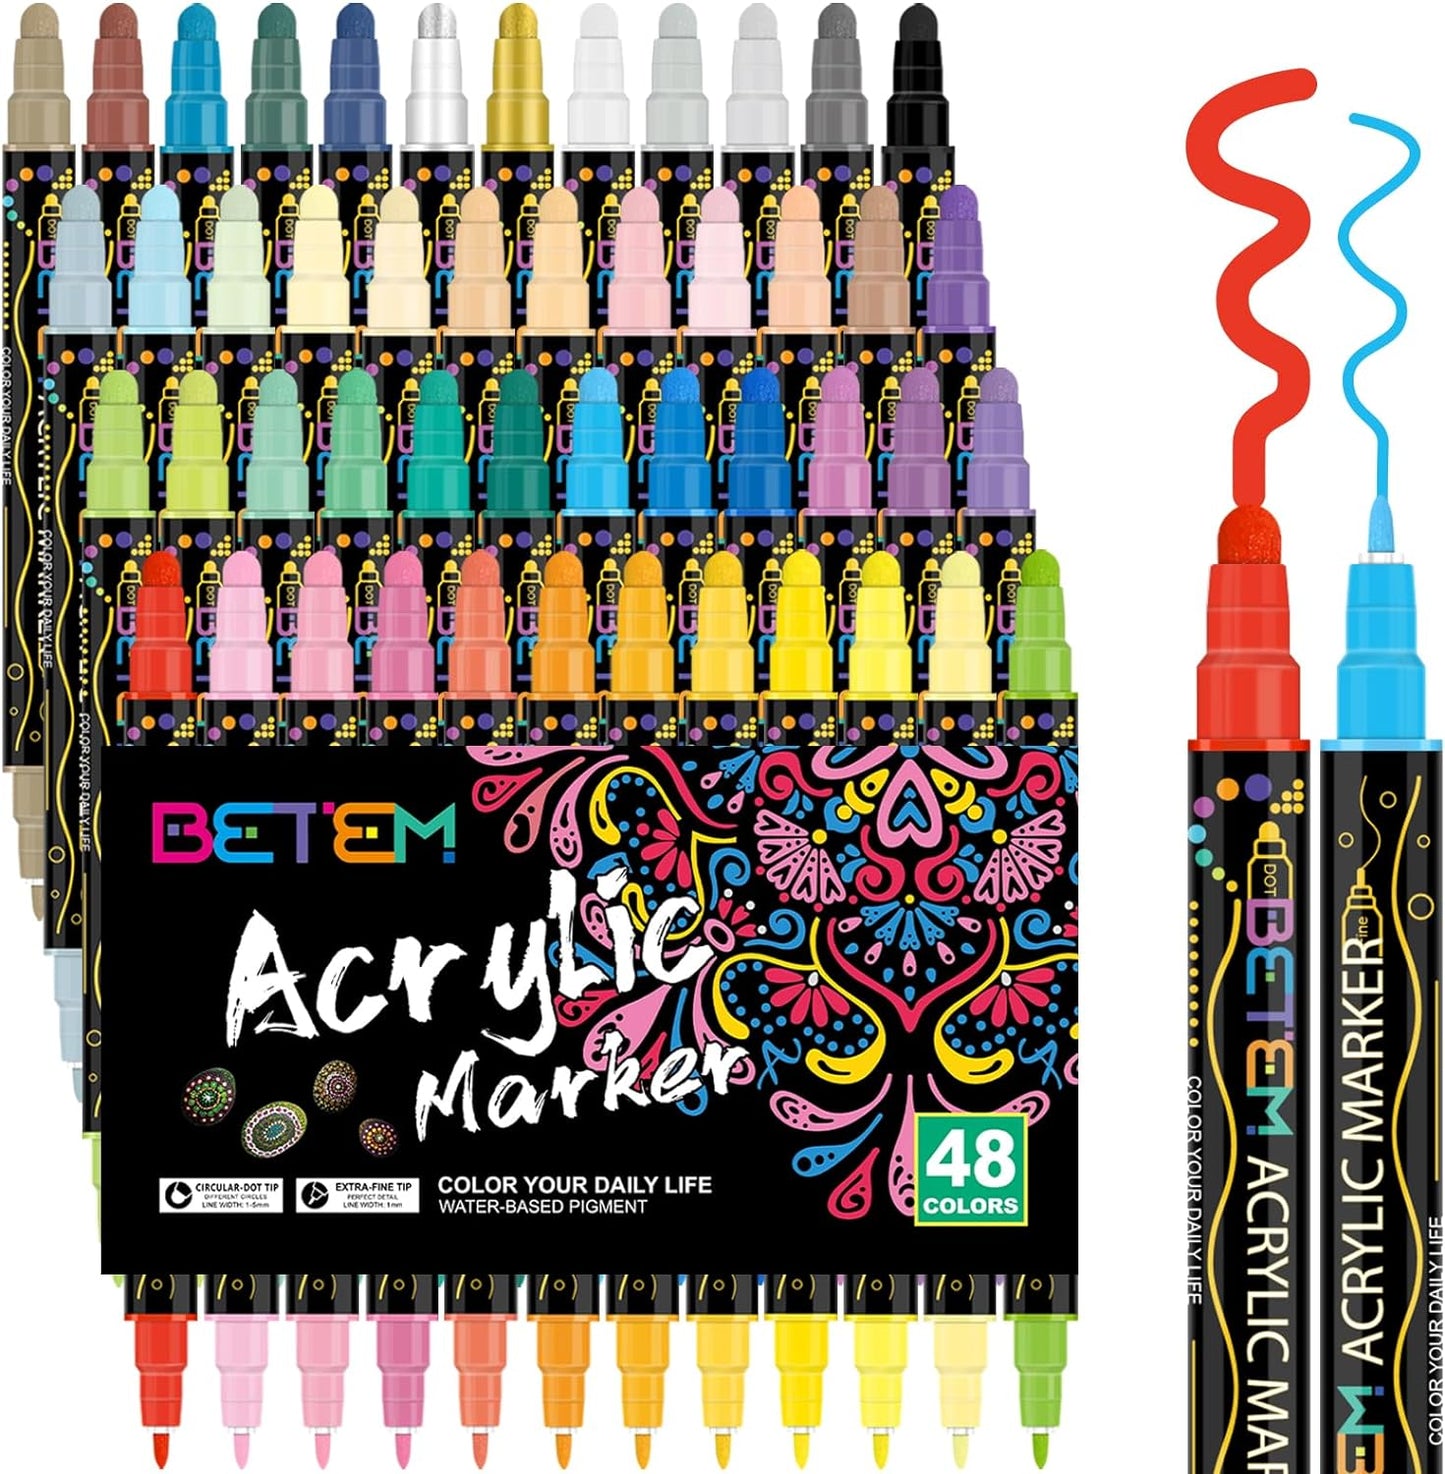 24 Colors Dual Tip Acrylic Paint Pens Markers, Premium Acrylic Paint Pens for Wood, Canvas, Stone, Rock Painting, Glass, Ceramic Surfaces, DIY Crafts Making Art Supplies